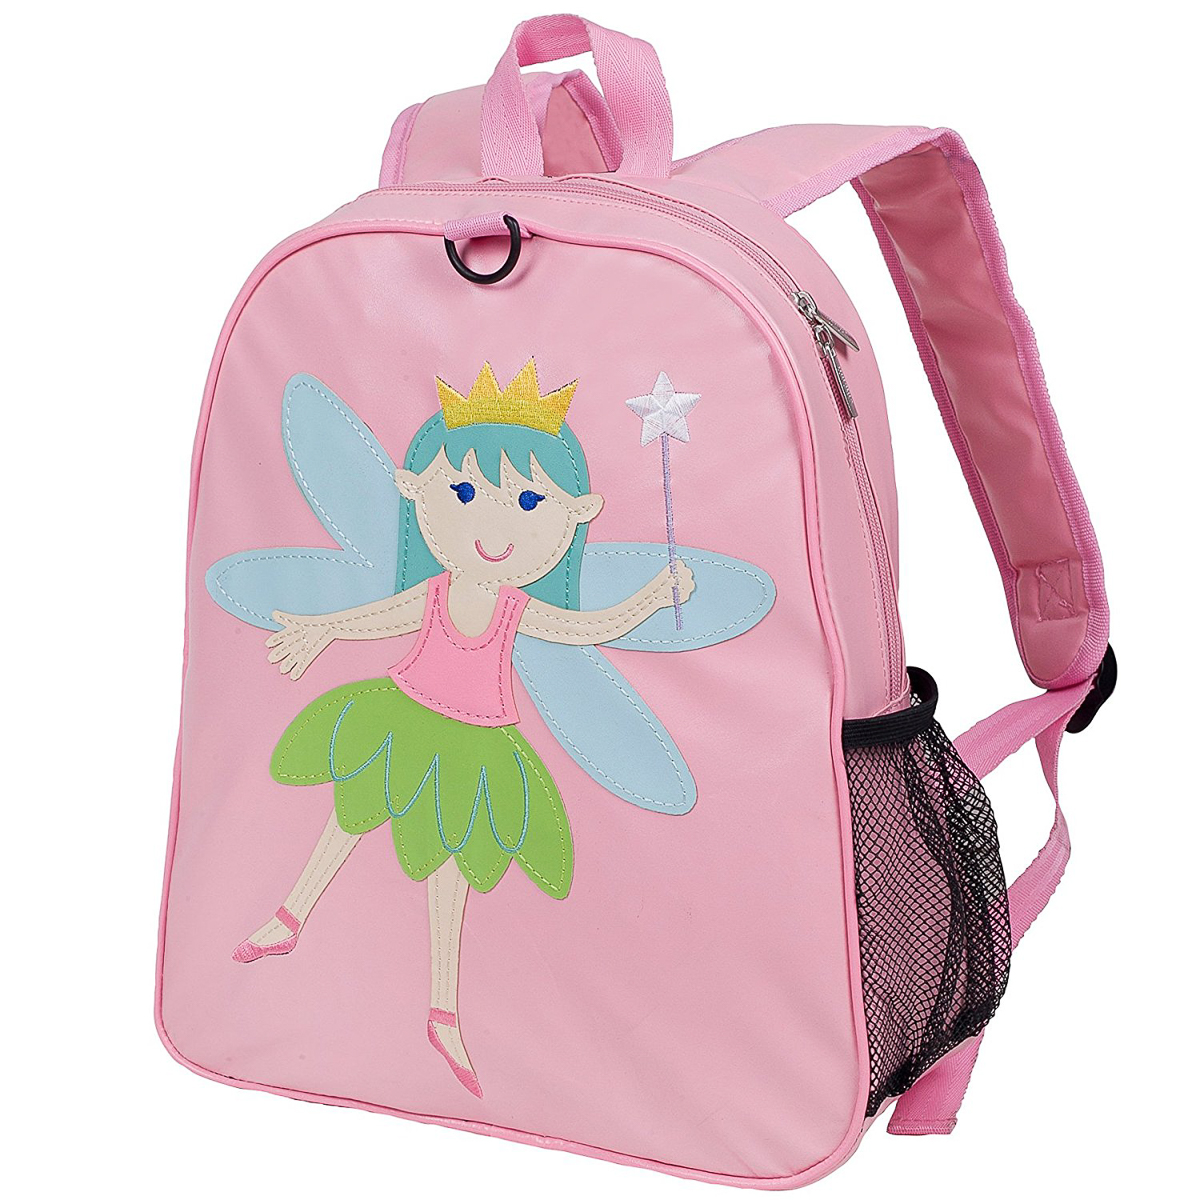 Wildkin Fairy Princess Pink Embroidered Kids Backpack for Boys and Girls - image 1 of 5